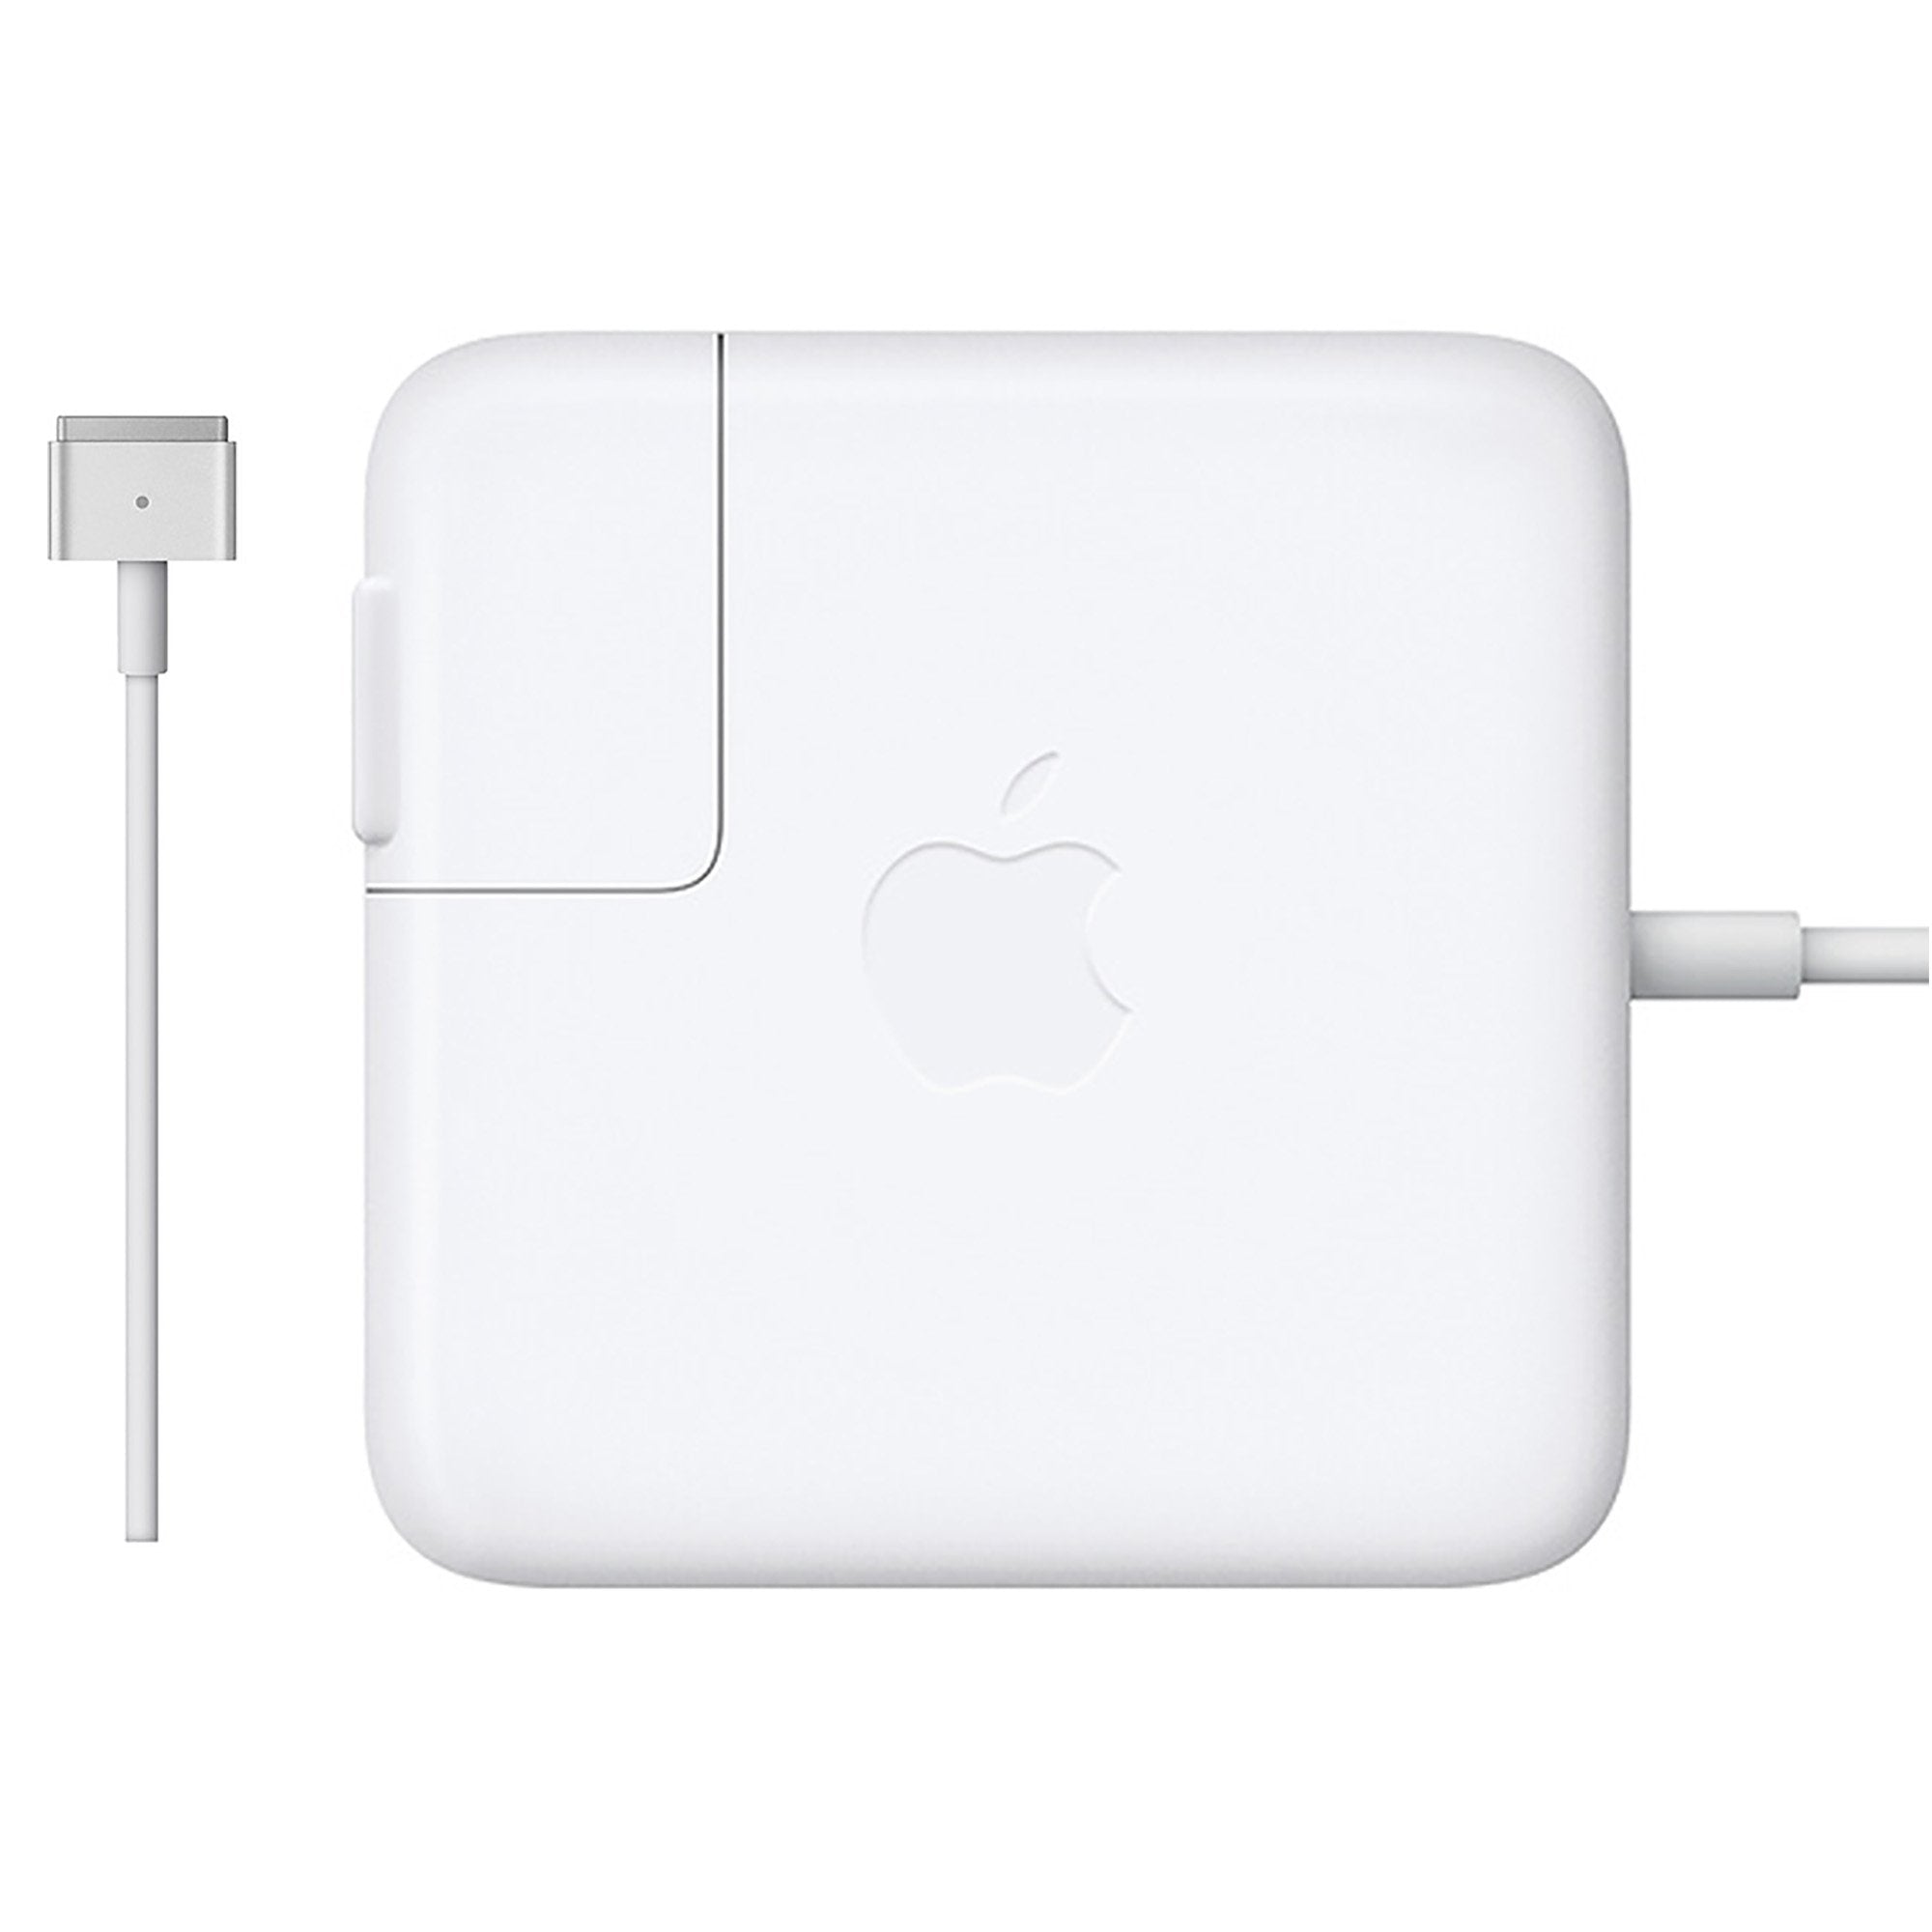 Apple Macbook A1342 EMC 2350 MC207LL/A Magsafe 2 Power Charger in Pakistan  – Laptop Spares